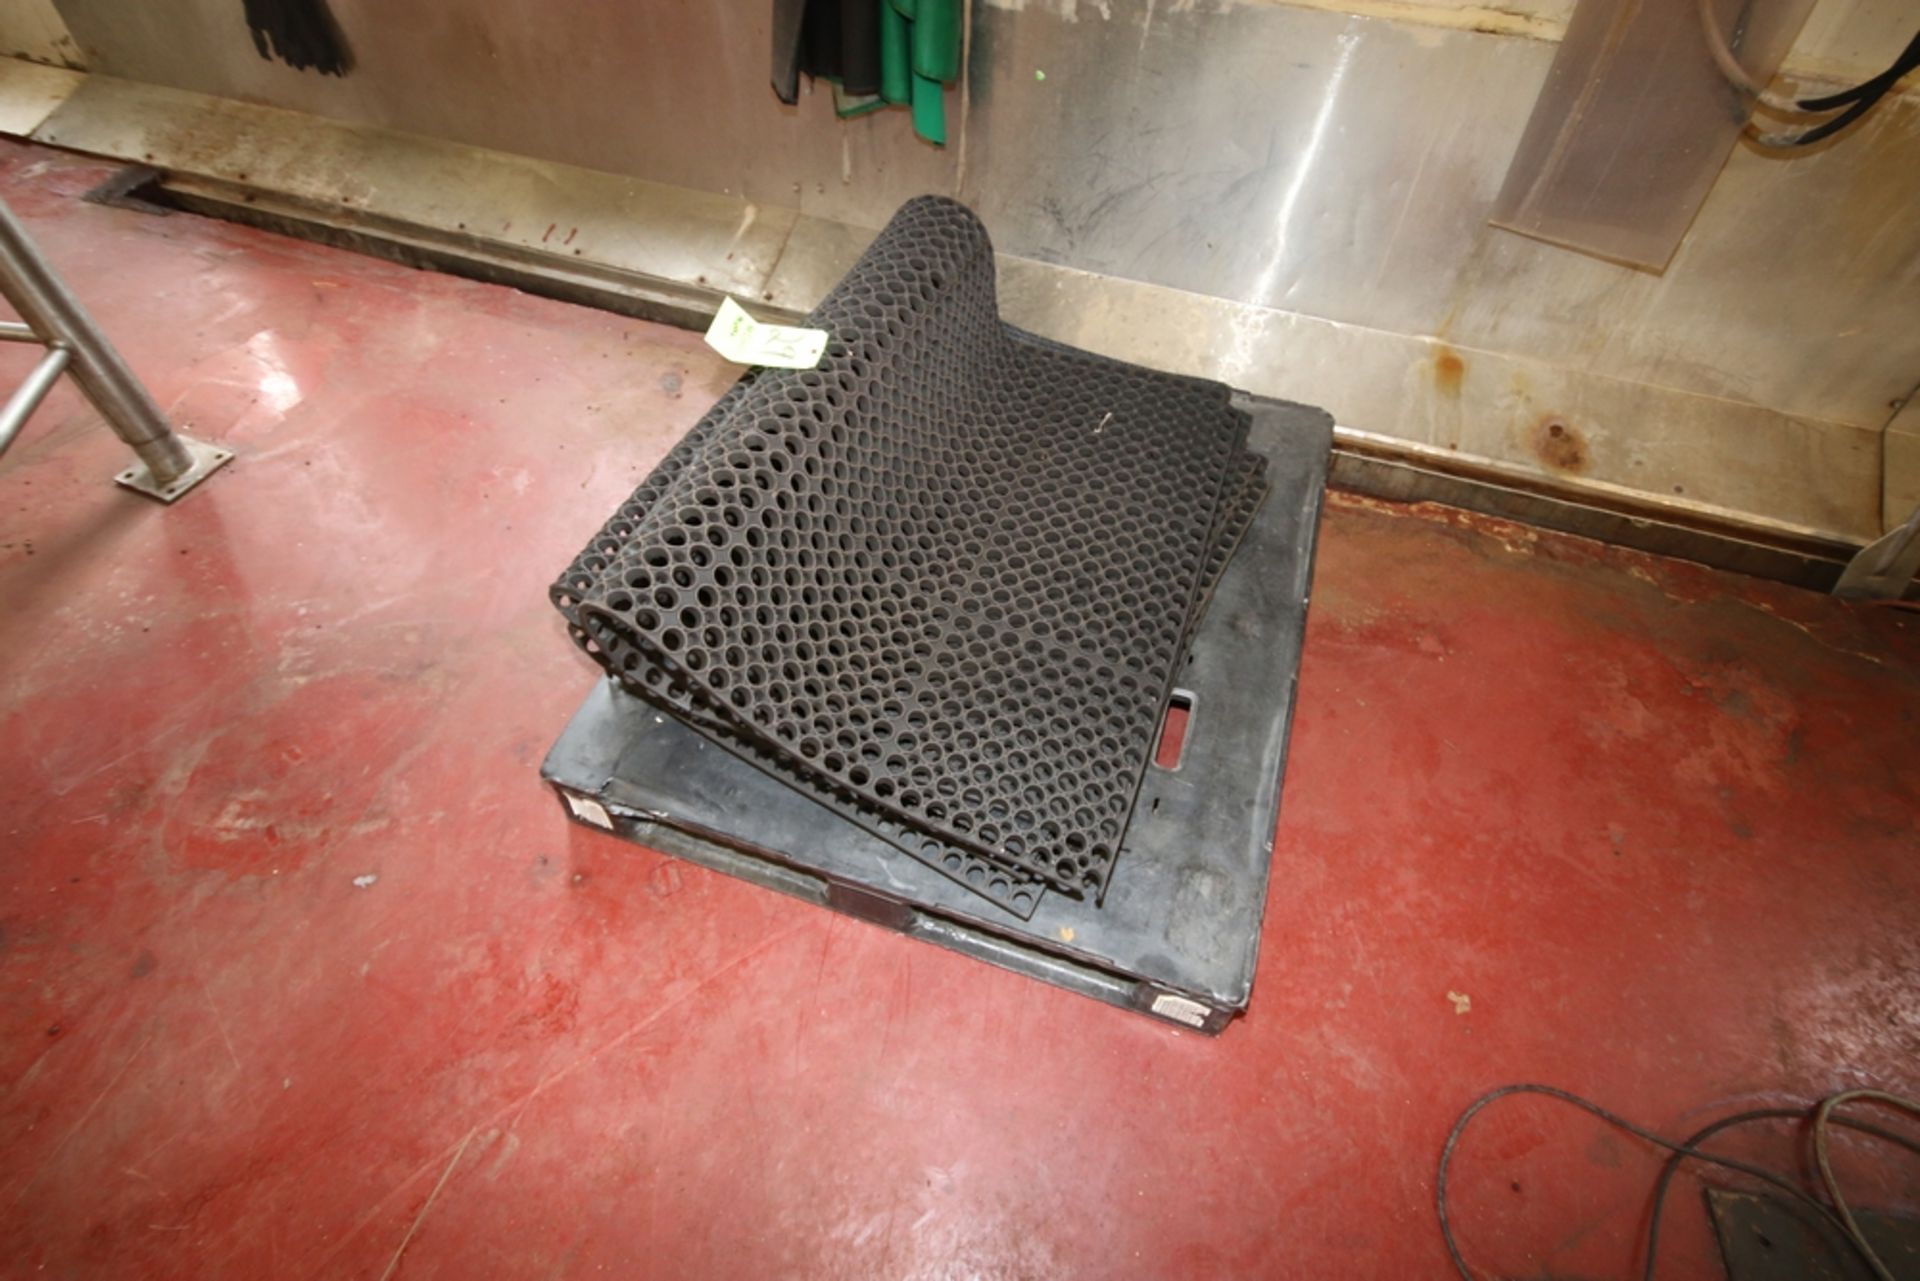 Rubber Mats, Aprox. 4' L x 3' W, On (1) Pallet - Image 2 of 2